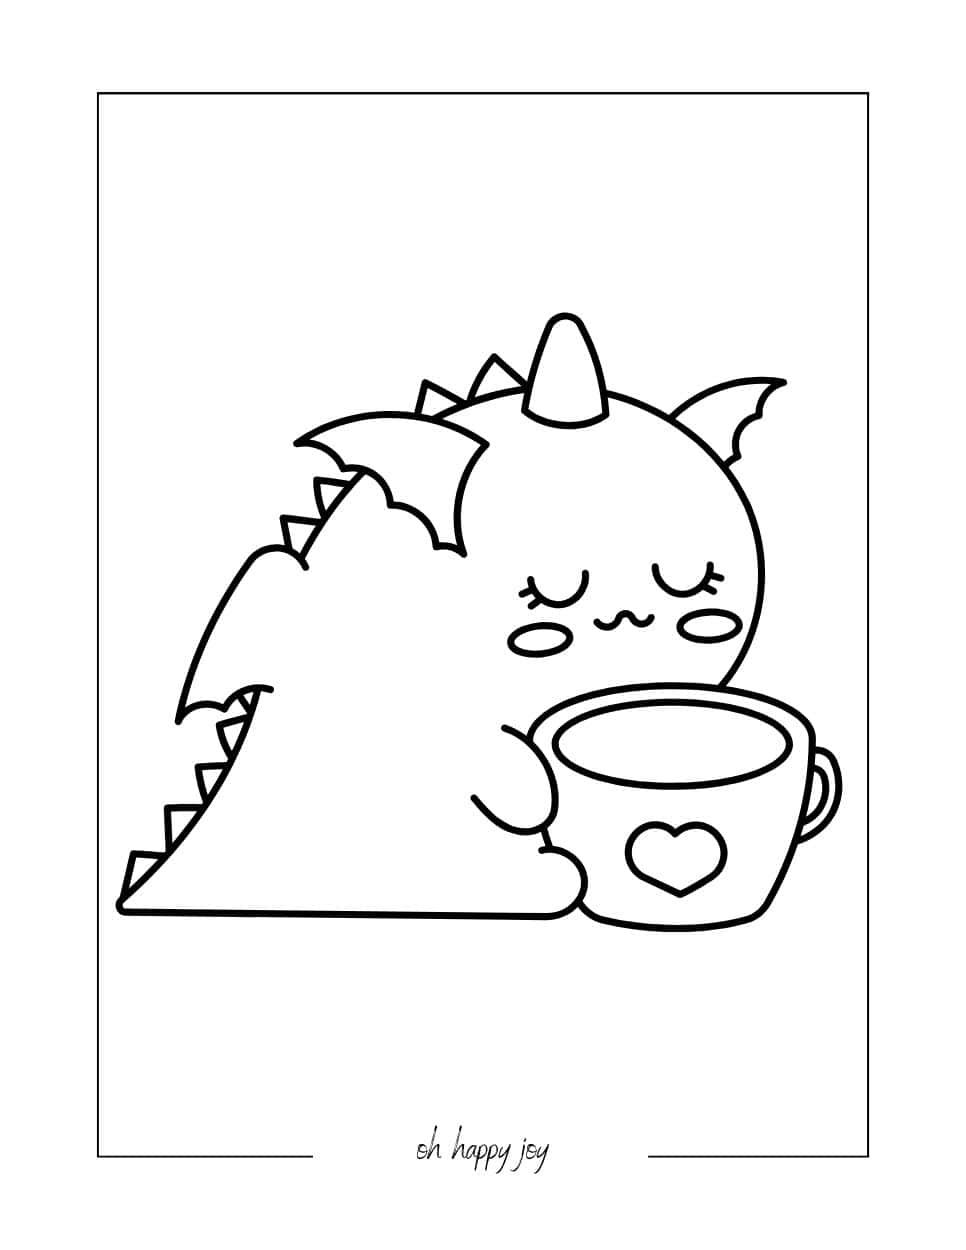 Dragon and Tea Coloring Page